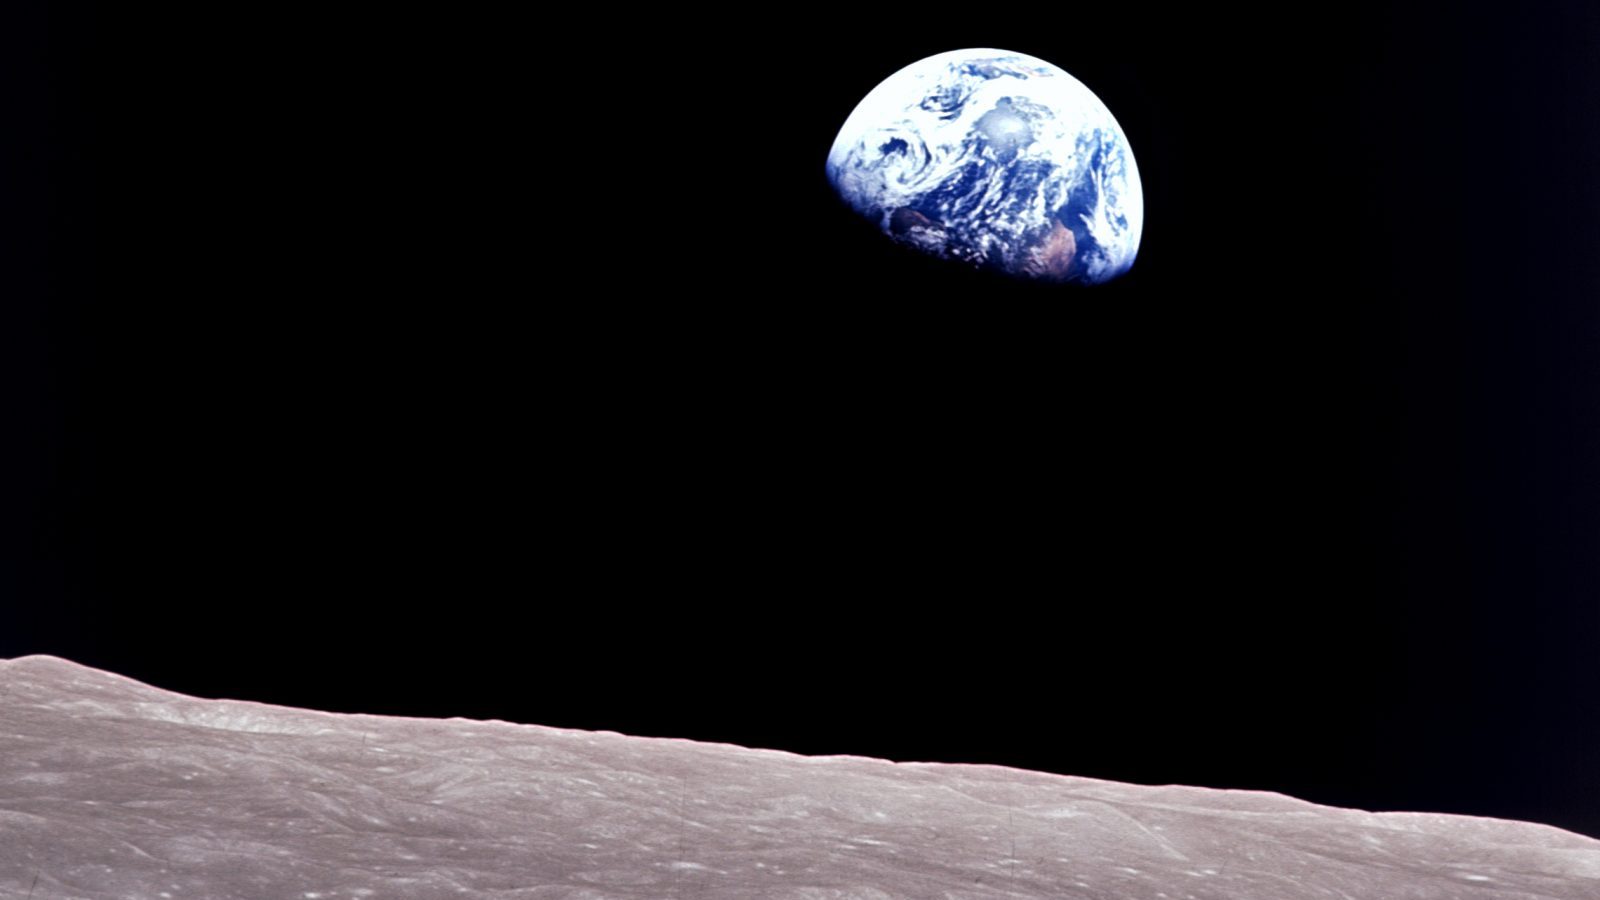 Taken aboard Apollo 8 by Bill Anders, this iconic picture shows Earth peeking out from beyond the lunar surface as the first crewed spacecraft circumnavigated the moon, with astronauts Anders, Frank Borman, and Jim Lovell aboard. (NASA)